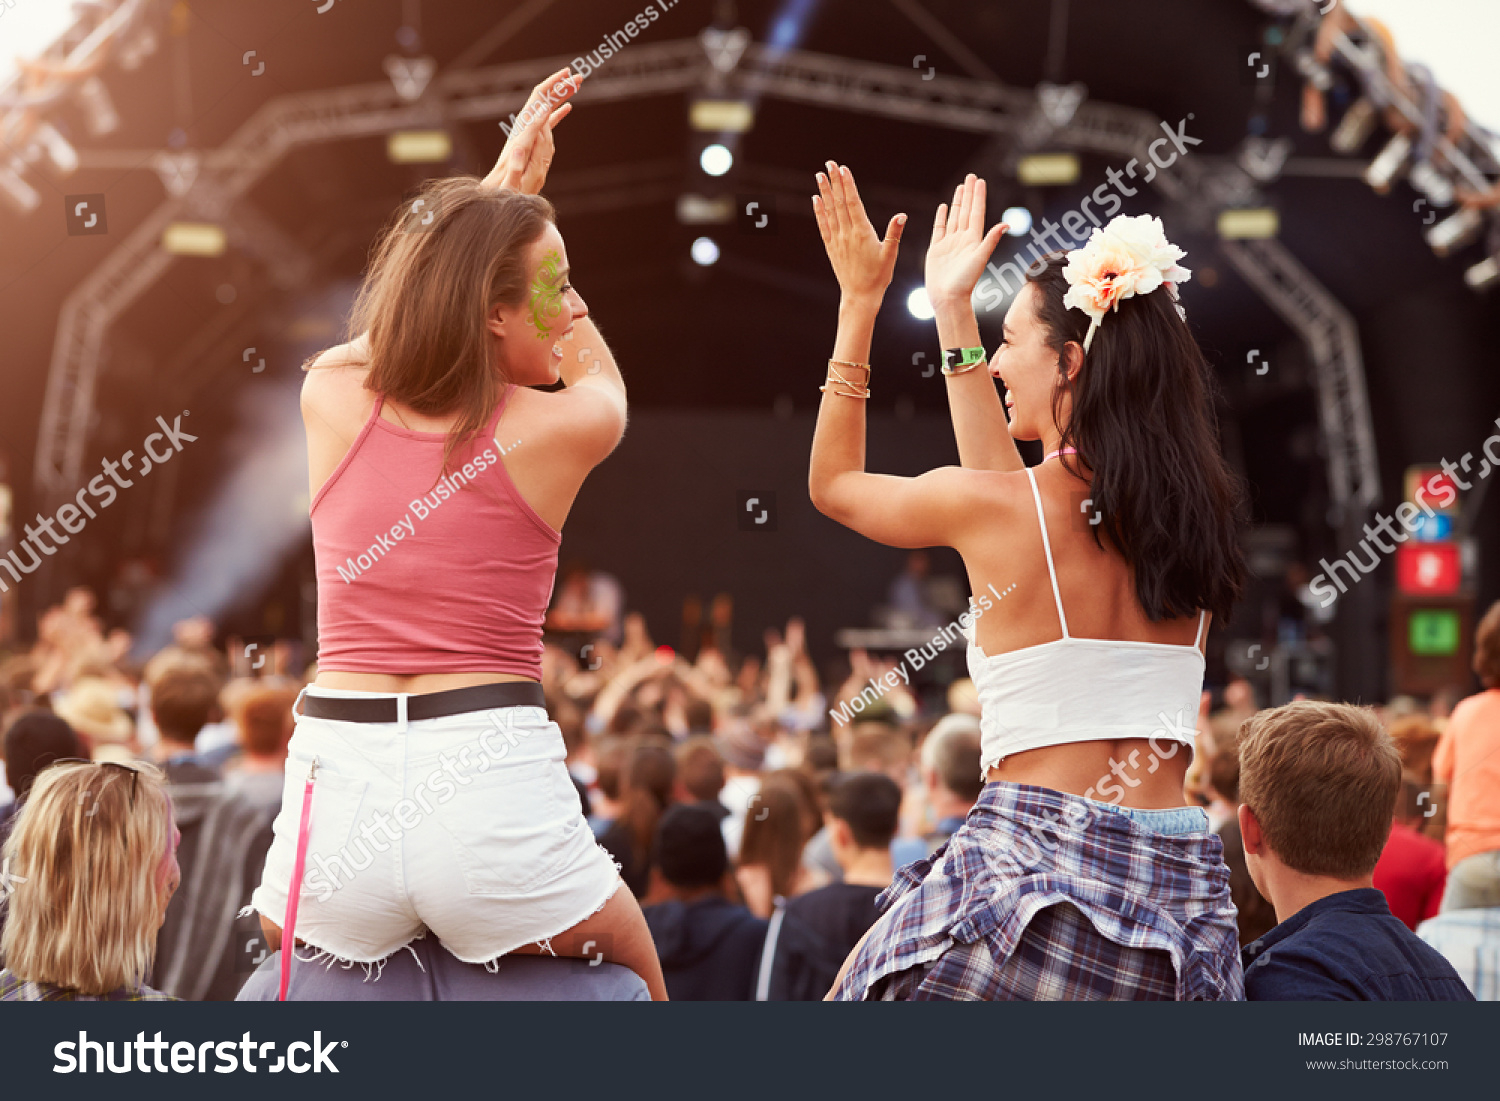 Two girls on shoulders in the crowd at a music festival #298767107